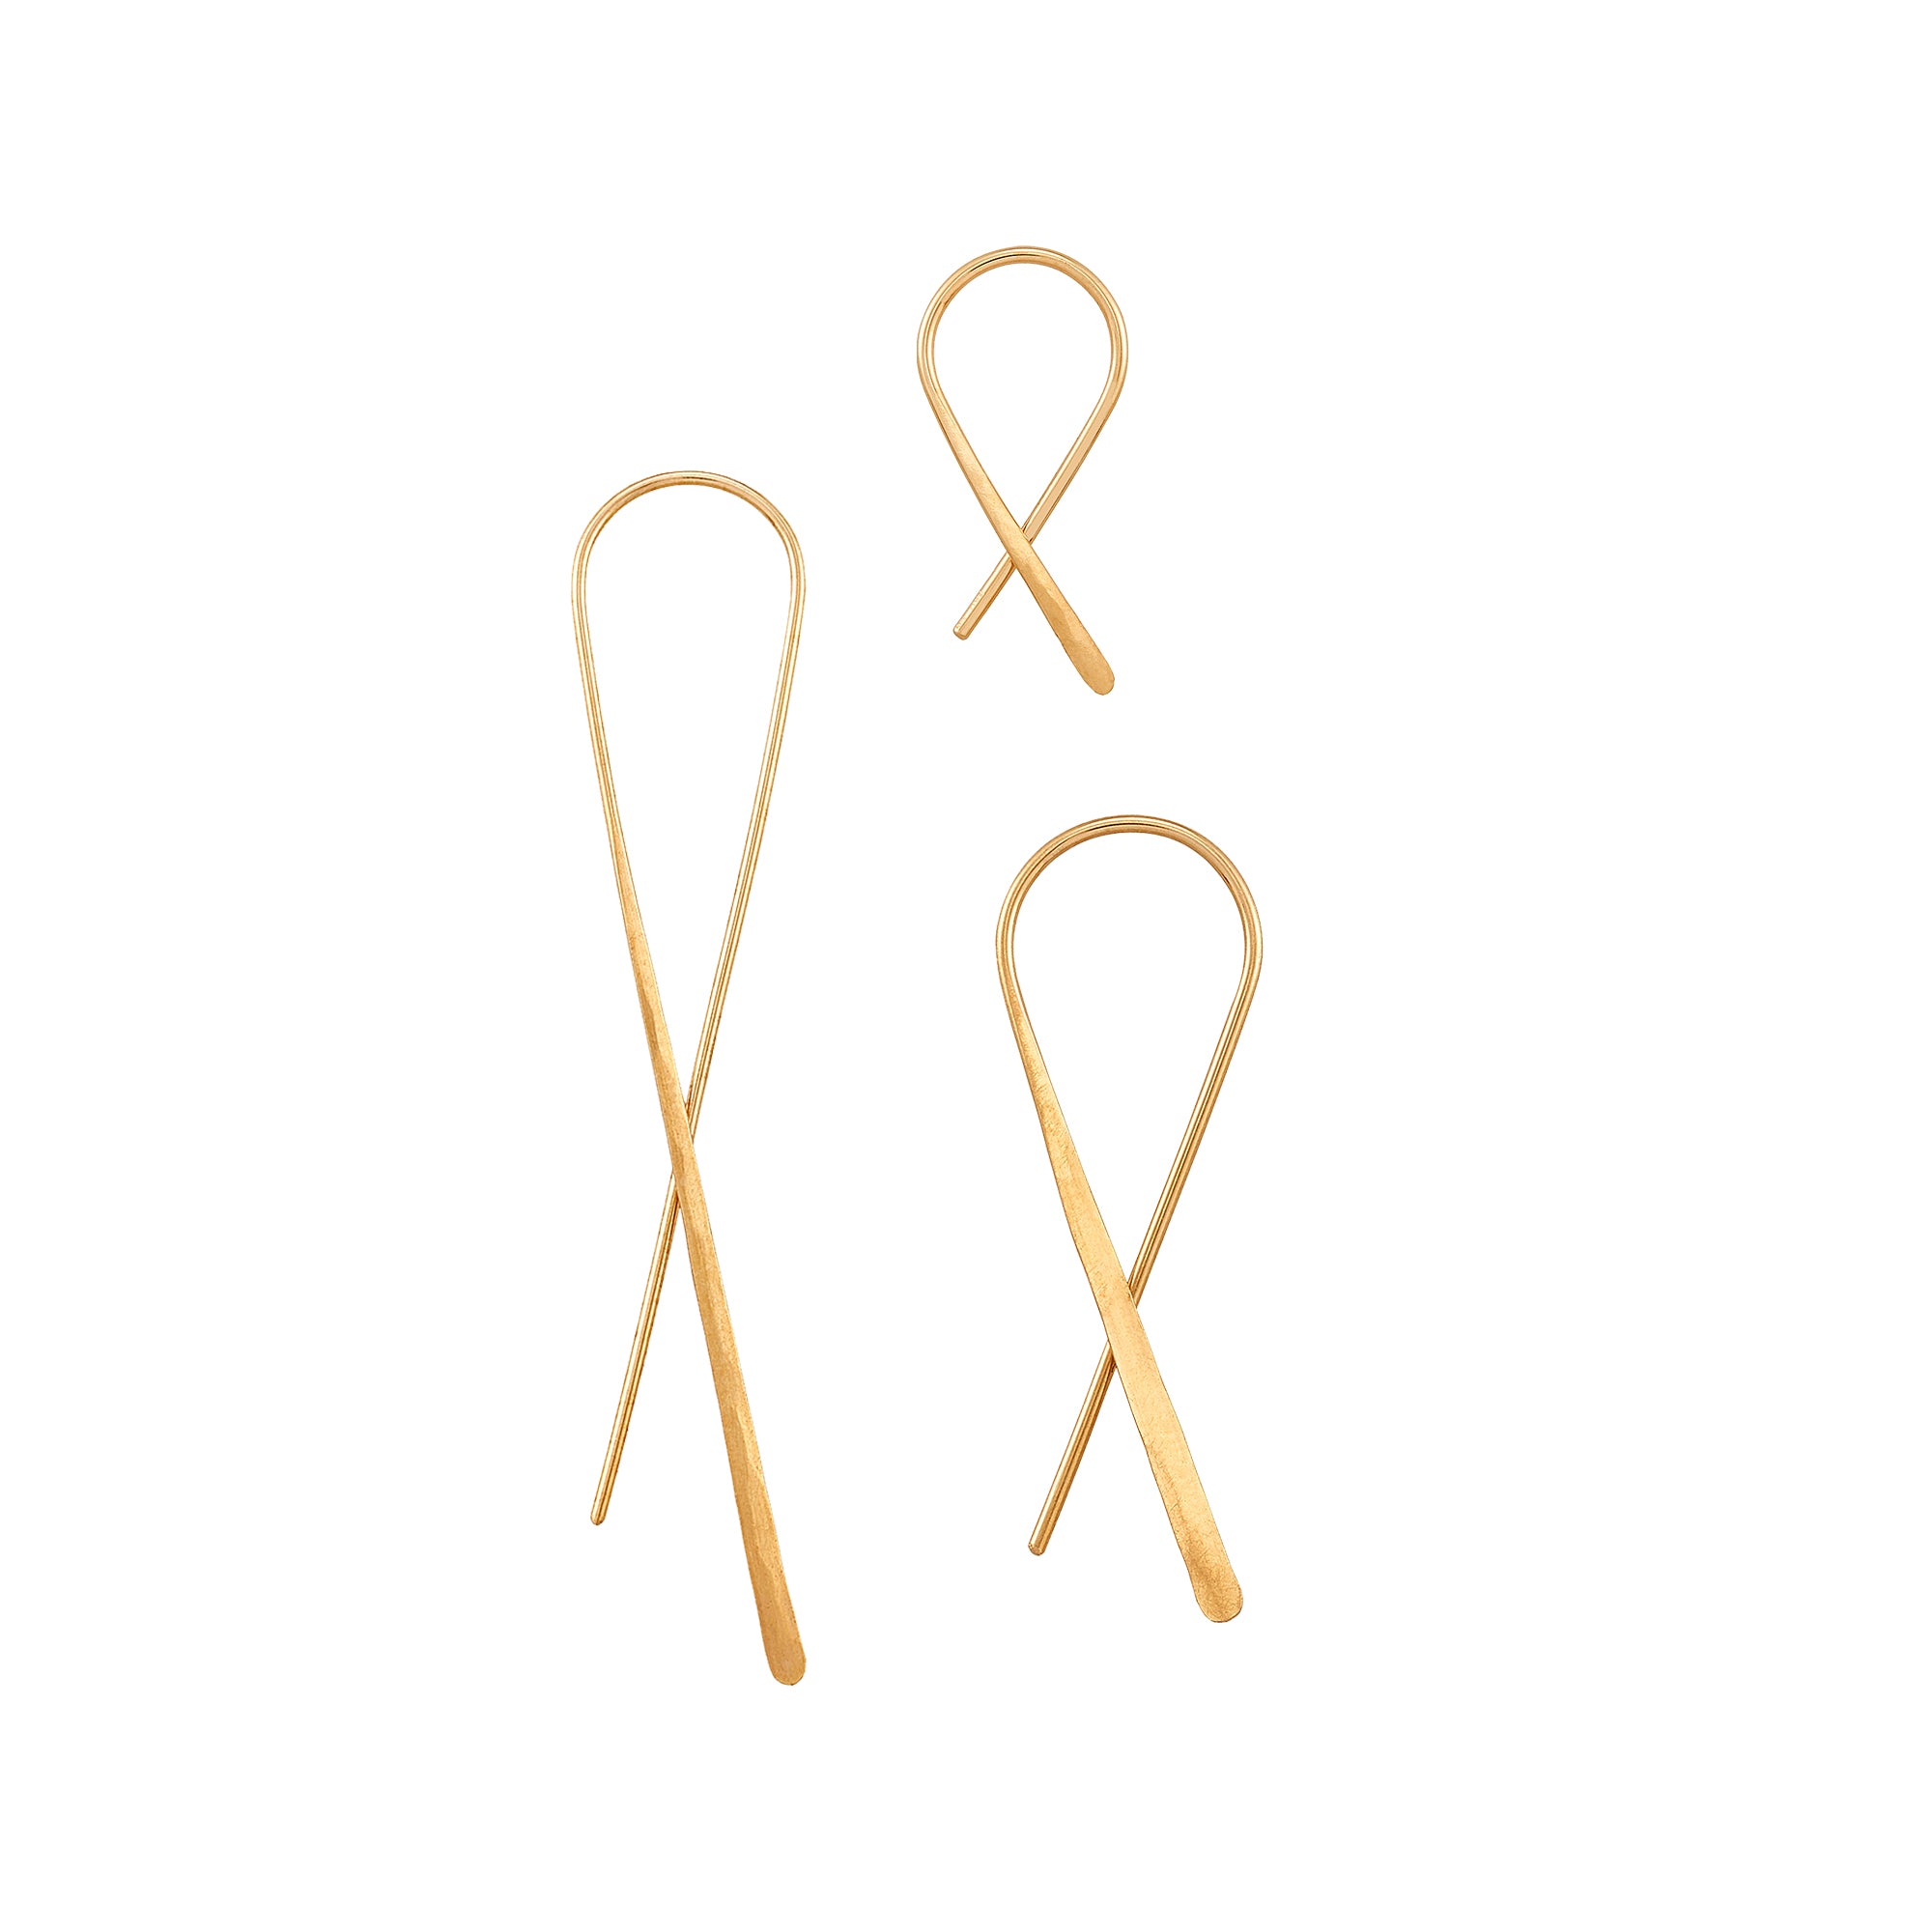 Crossed Hook earrings, these delicate and modern threaders feature crossed 14k gold wire forged on one side. 